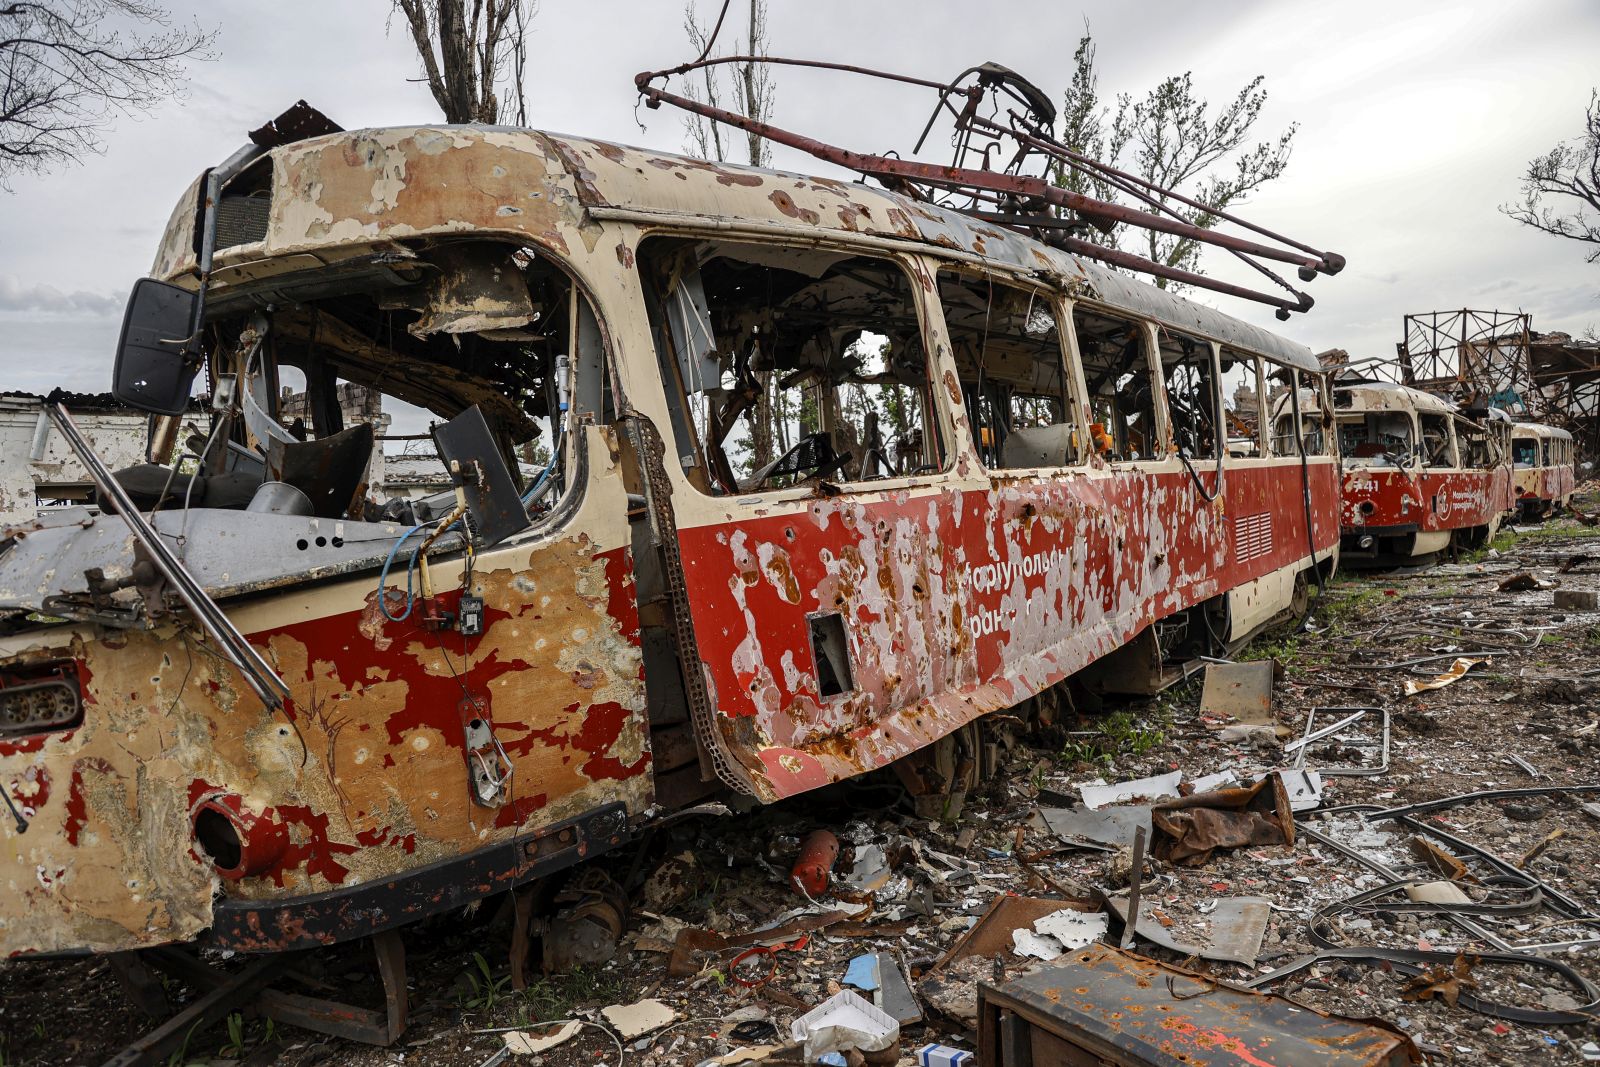 epa09991165 (FILE) - A destroyed tram at a tram depot in Mariupol, Ukraine, 21 May 2022 (reissued 03 June 2022). 04 June 2022 marks 100 days since on 24 February 2022 Russian troops invaded Ukrainian territory in what the Russian president declared a "Special Military Operation", starting an armed conflict that has provoked destruction and a humanitarian crisis. According to the UNHCR, more than 6.8 million refugees have fled Ukraine, and a further 7.7 million people have been displaced internally within Ukraine since. The Russian invasion was met by Western countries with heavy economic sanctions against Russian companies and individuals, as well as weaponry deliveries and financial support to Ukraine.  EPA/ALESSANDRO GUERRA  ATTENTION: This Image is part of a PHOTO SET *** Local Caption *** 57697128